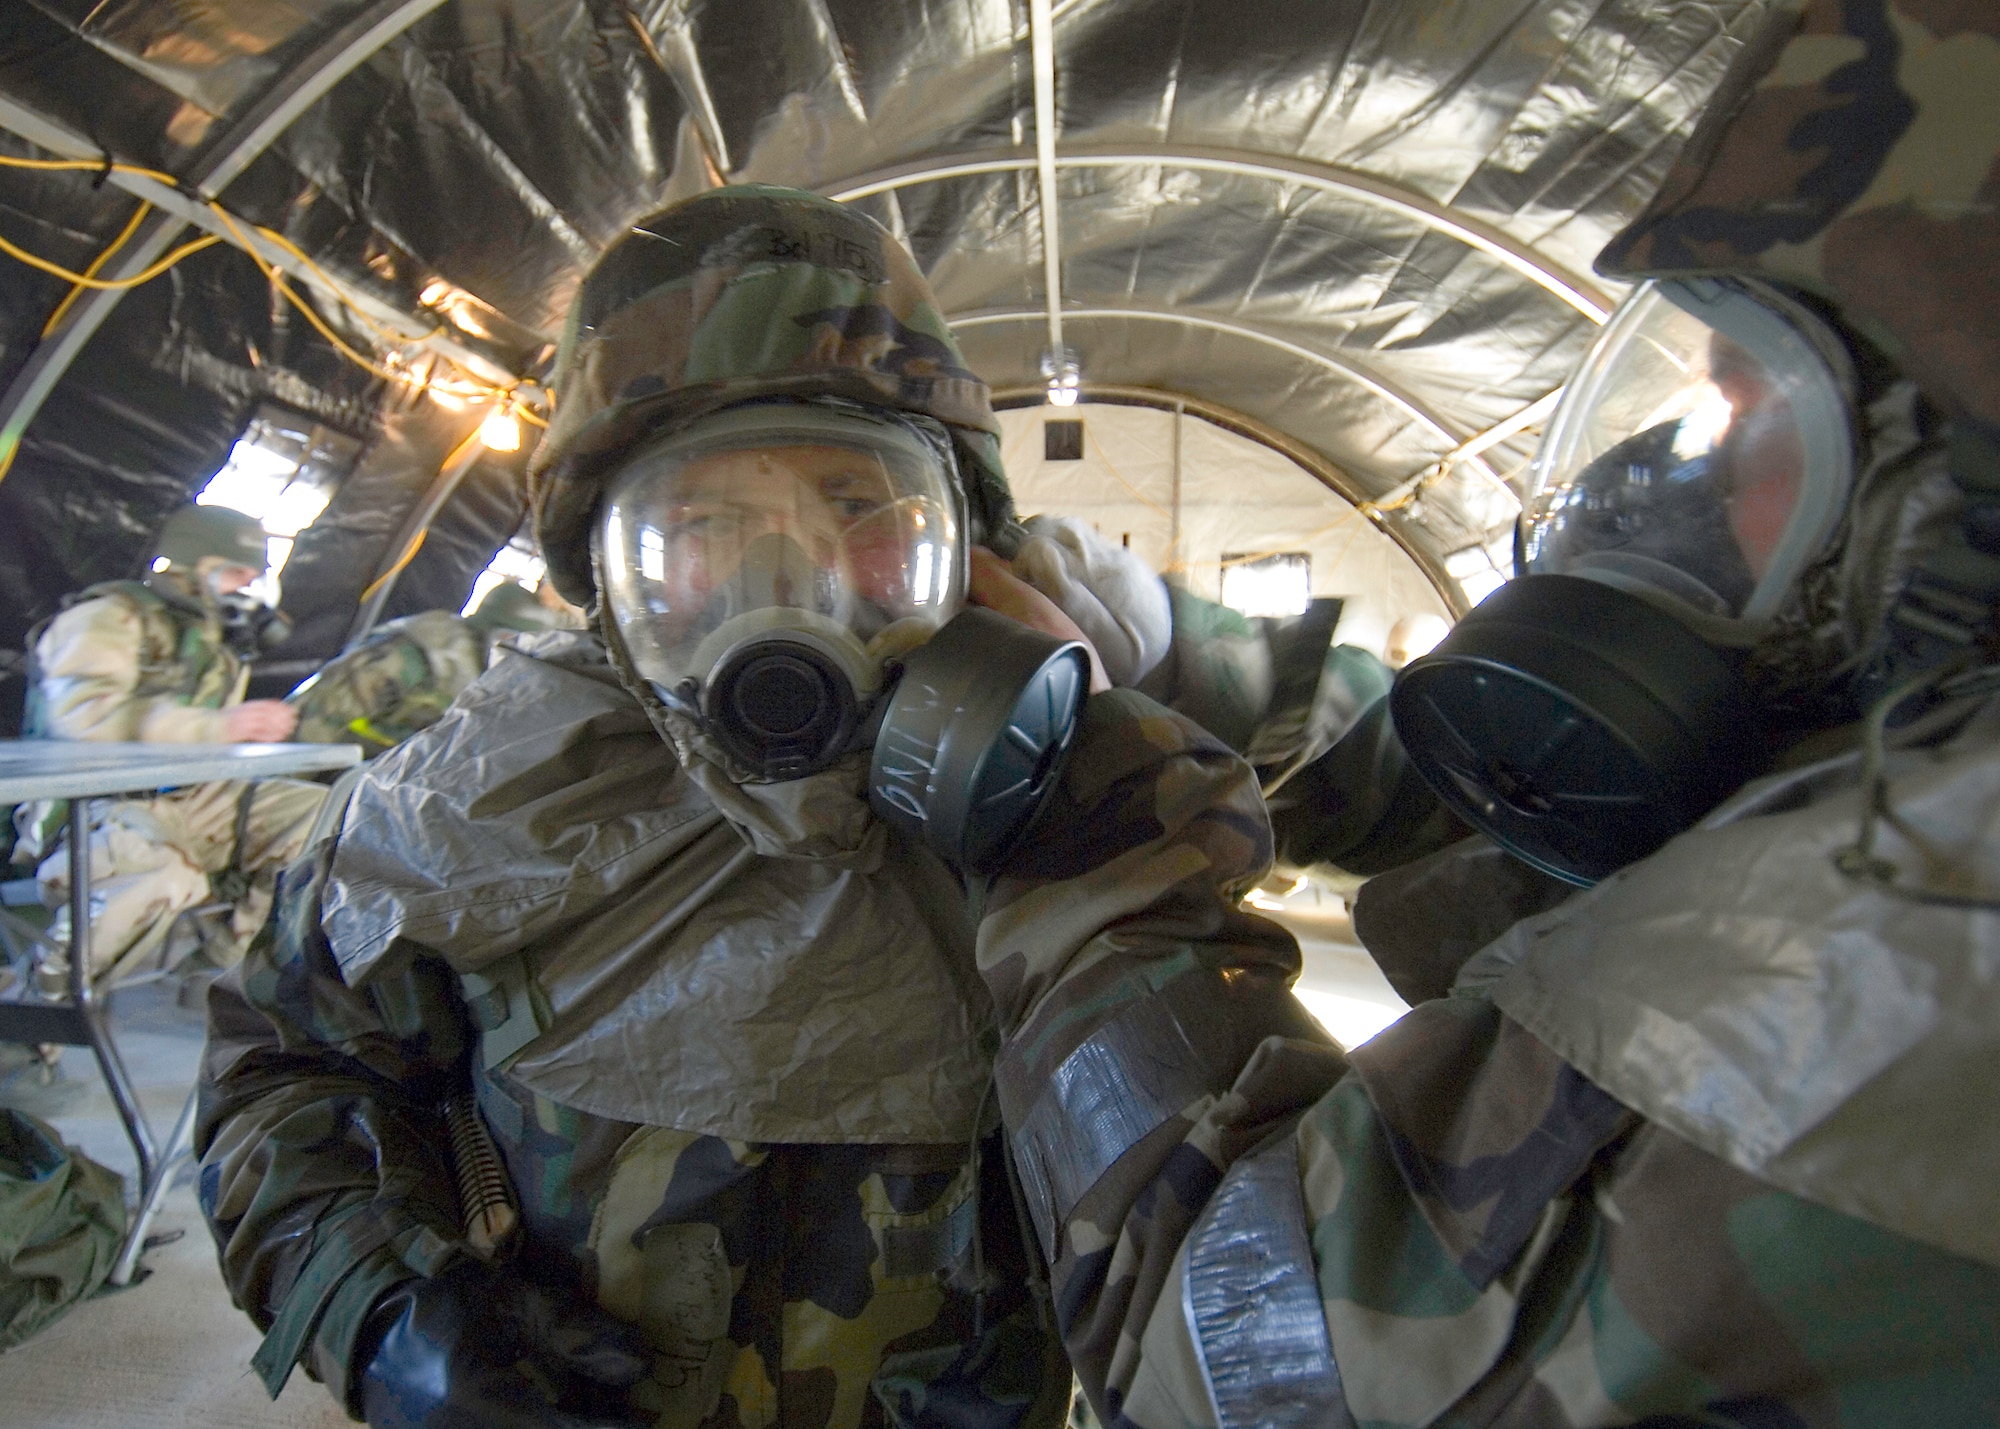 Airmen perform buddy checks on their chemical suits during the ORE. (Photo by Mike Cassidy)